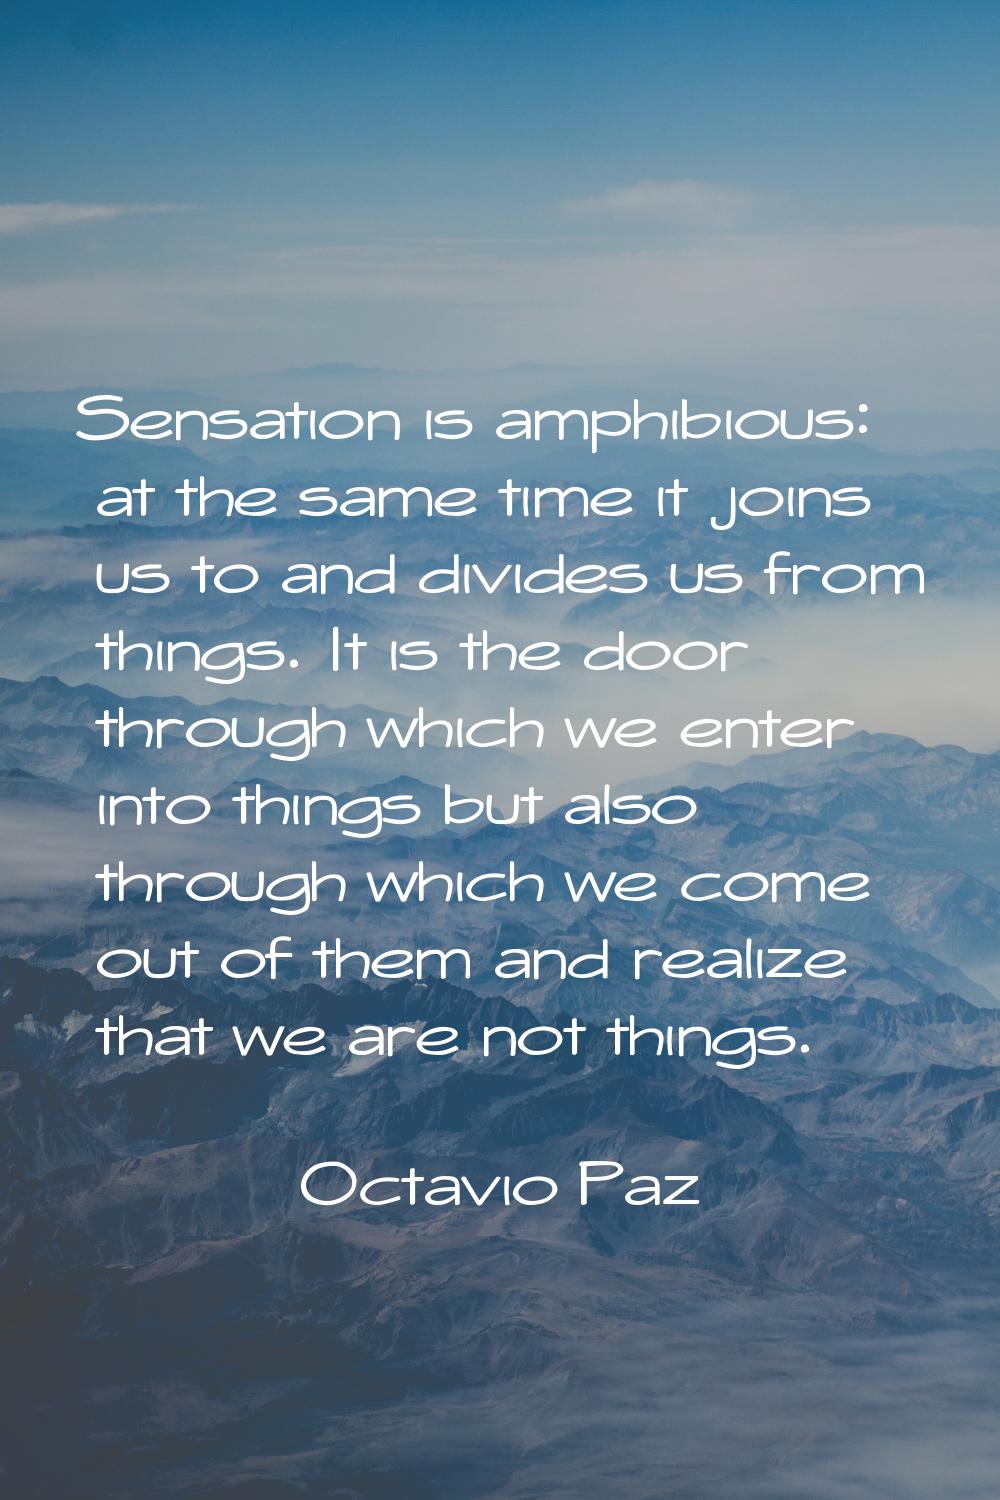 Sensation is amphibious: at the same time it joins us to and divides us from things. It is the door